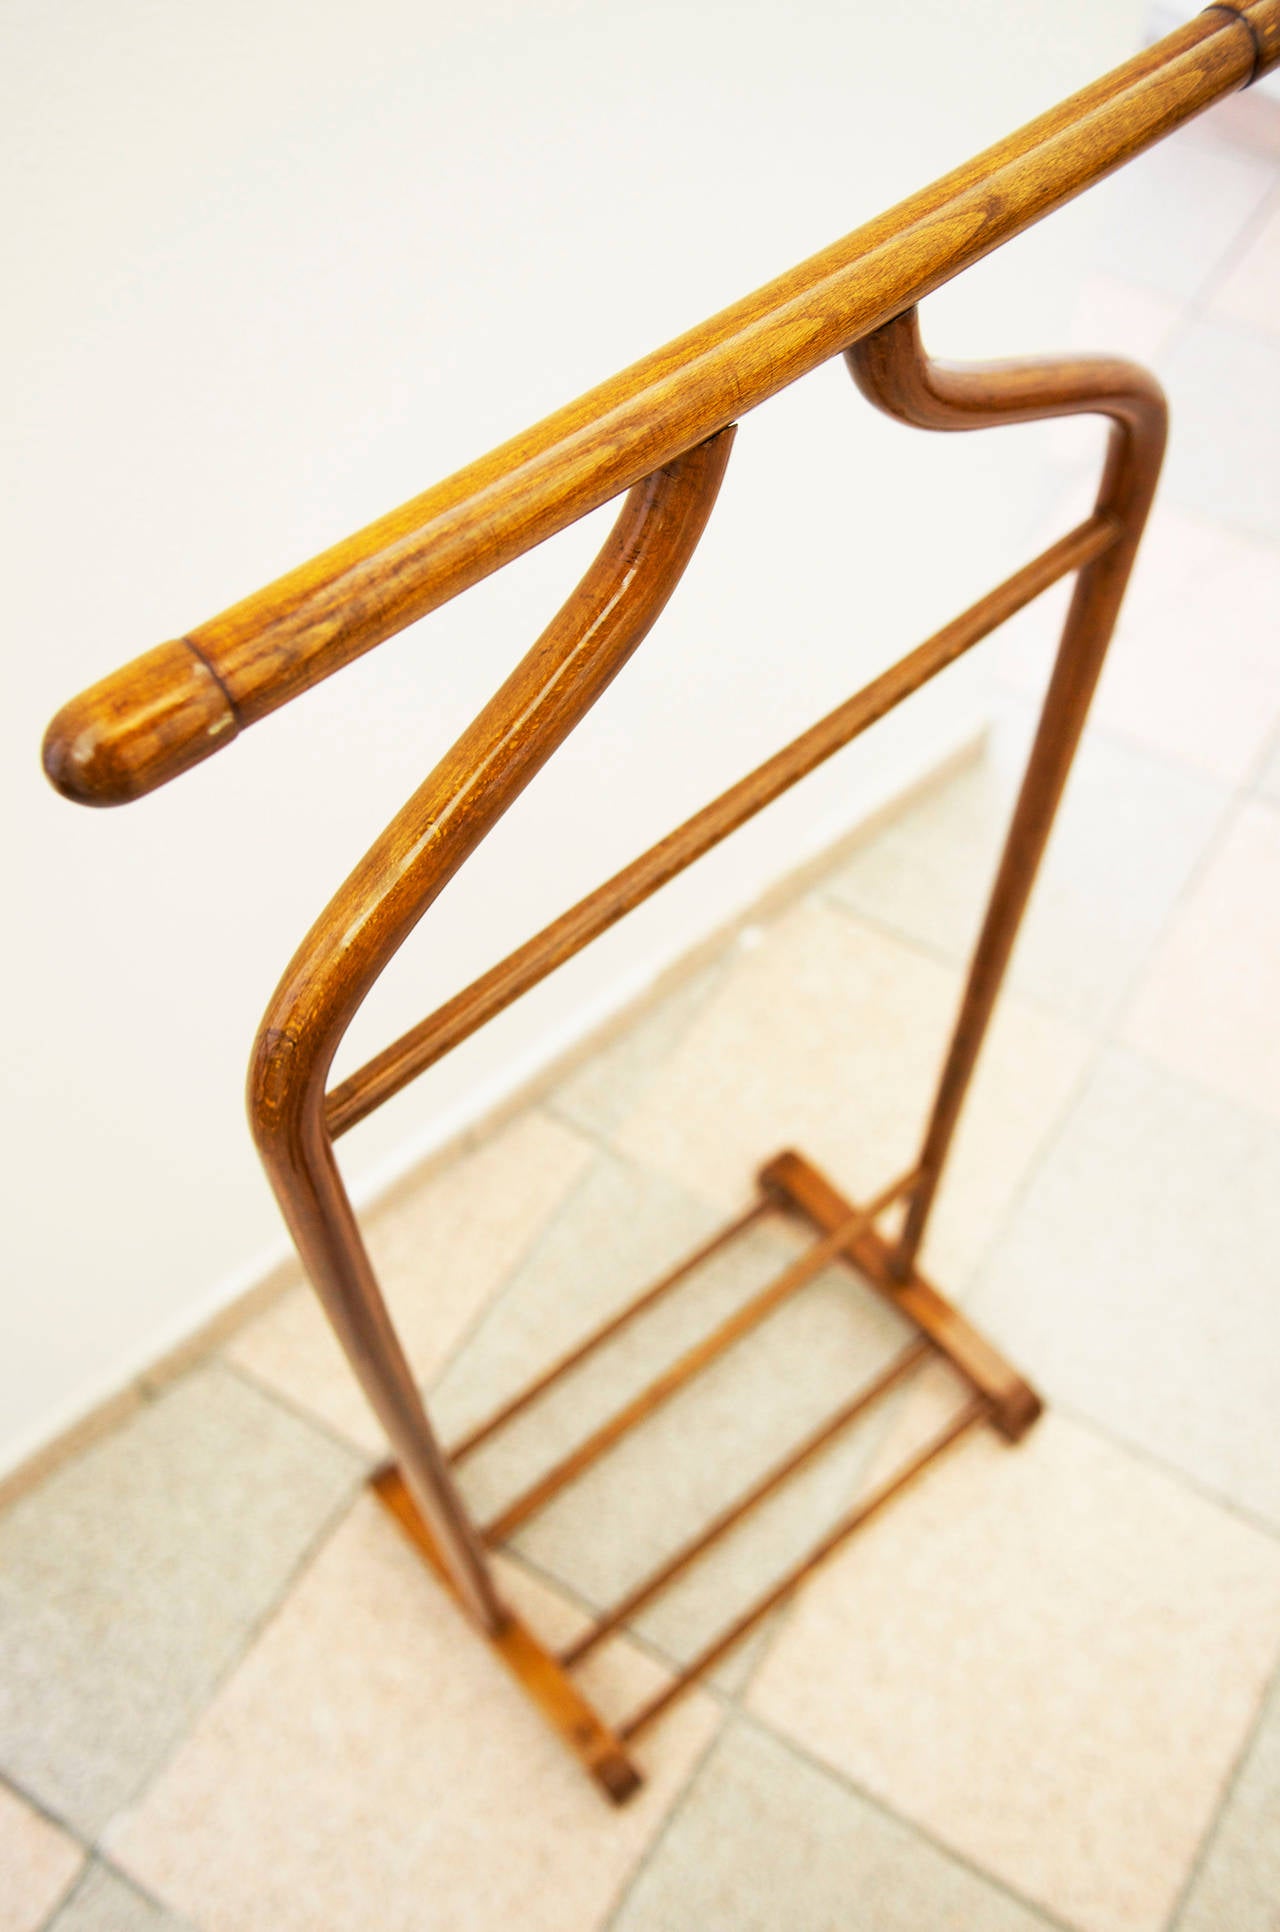 Thonet valet, dressing stand from the 1920s 
fully restored with shellack finish.